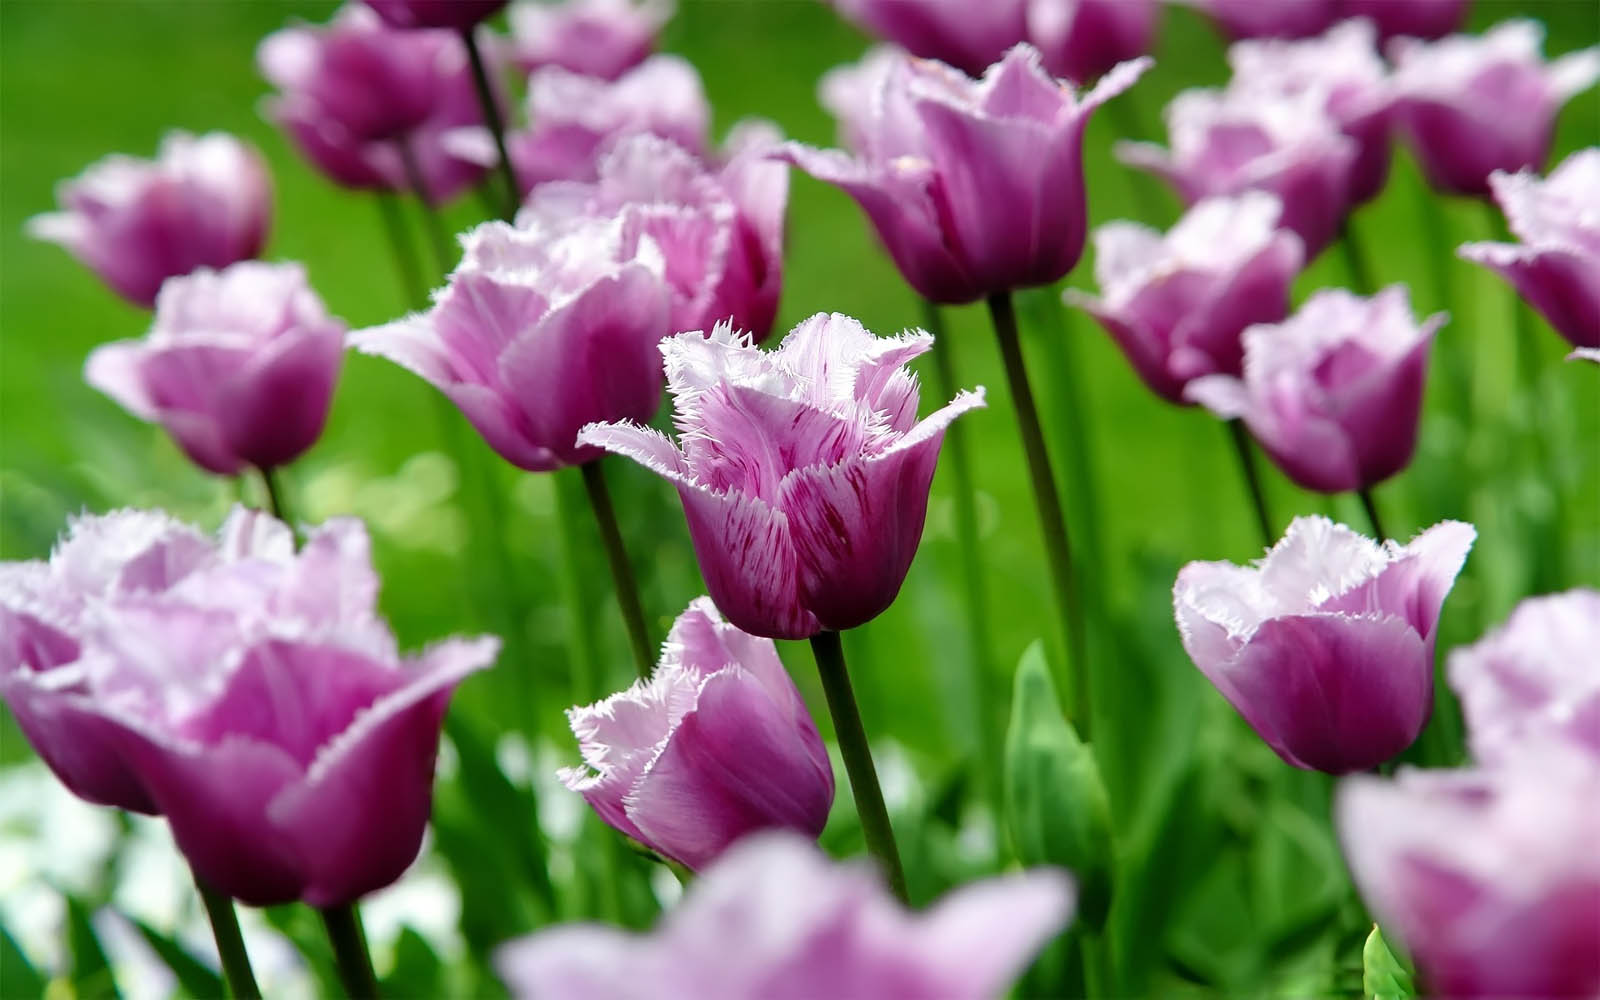 Wallpapers Purple Tulips Flowers Wallpapers HD Wallpapers Download Free Map Images Wallpaper [wallpaper376.blogspot.com]